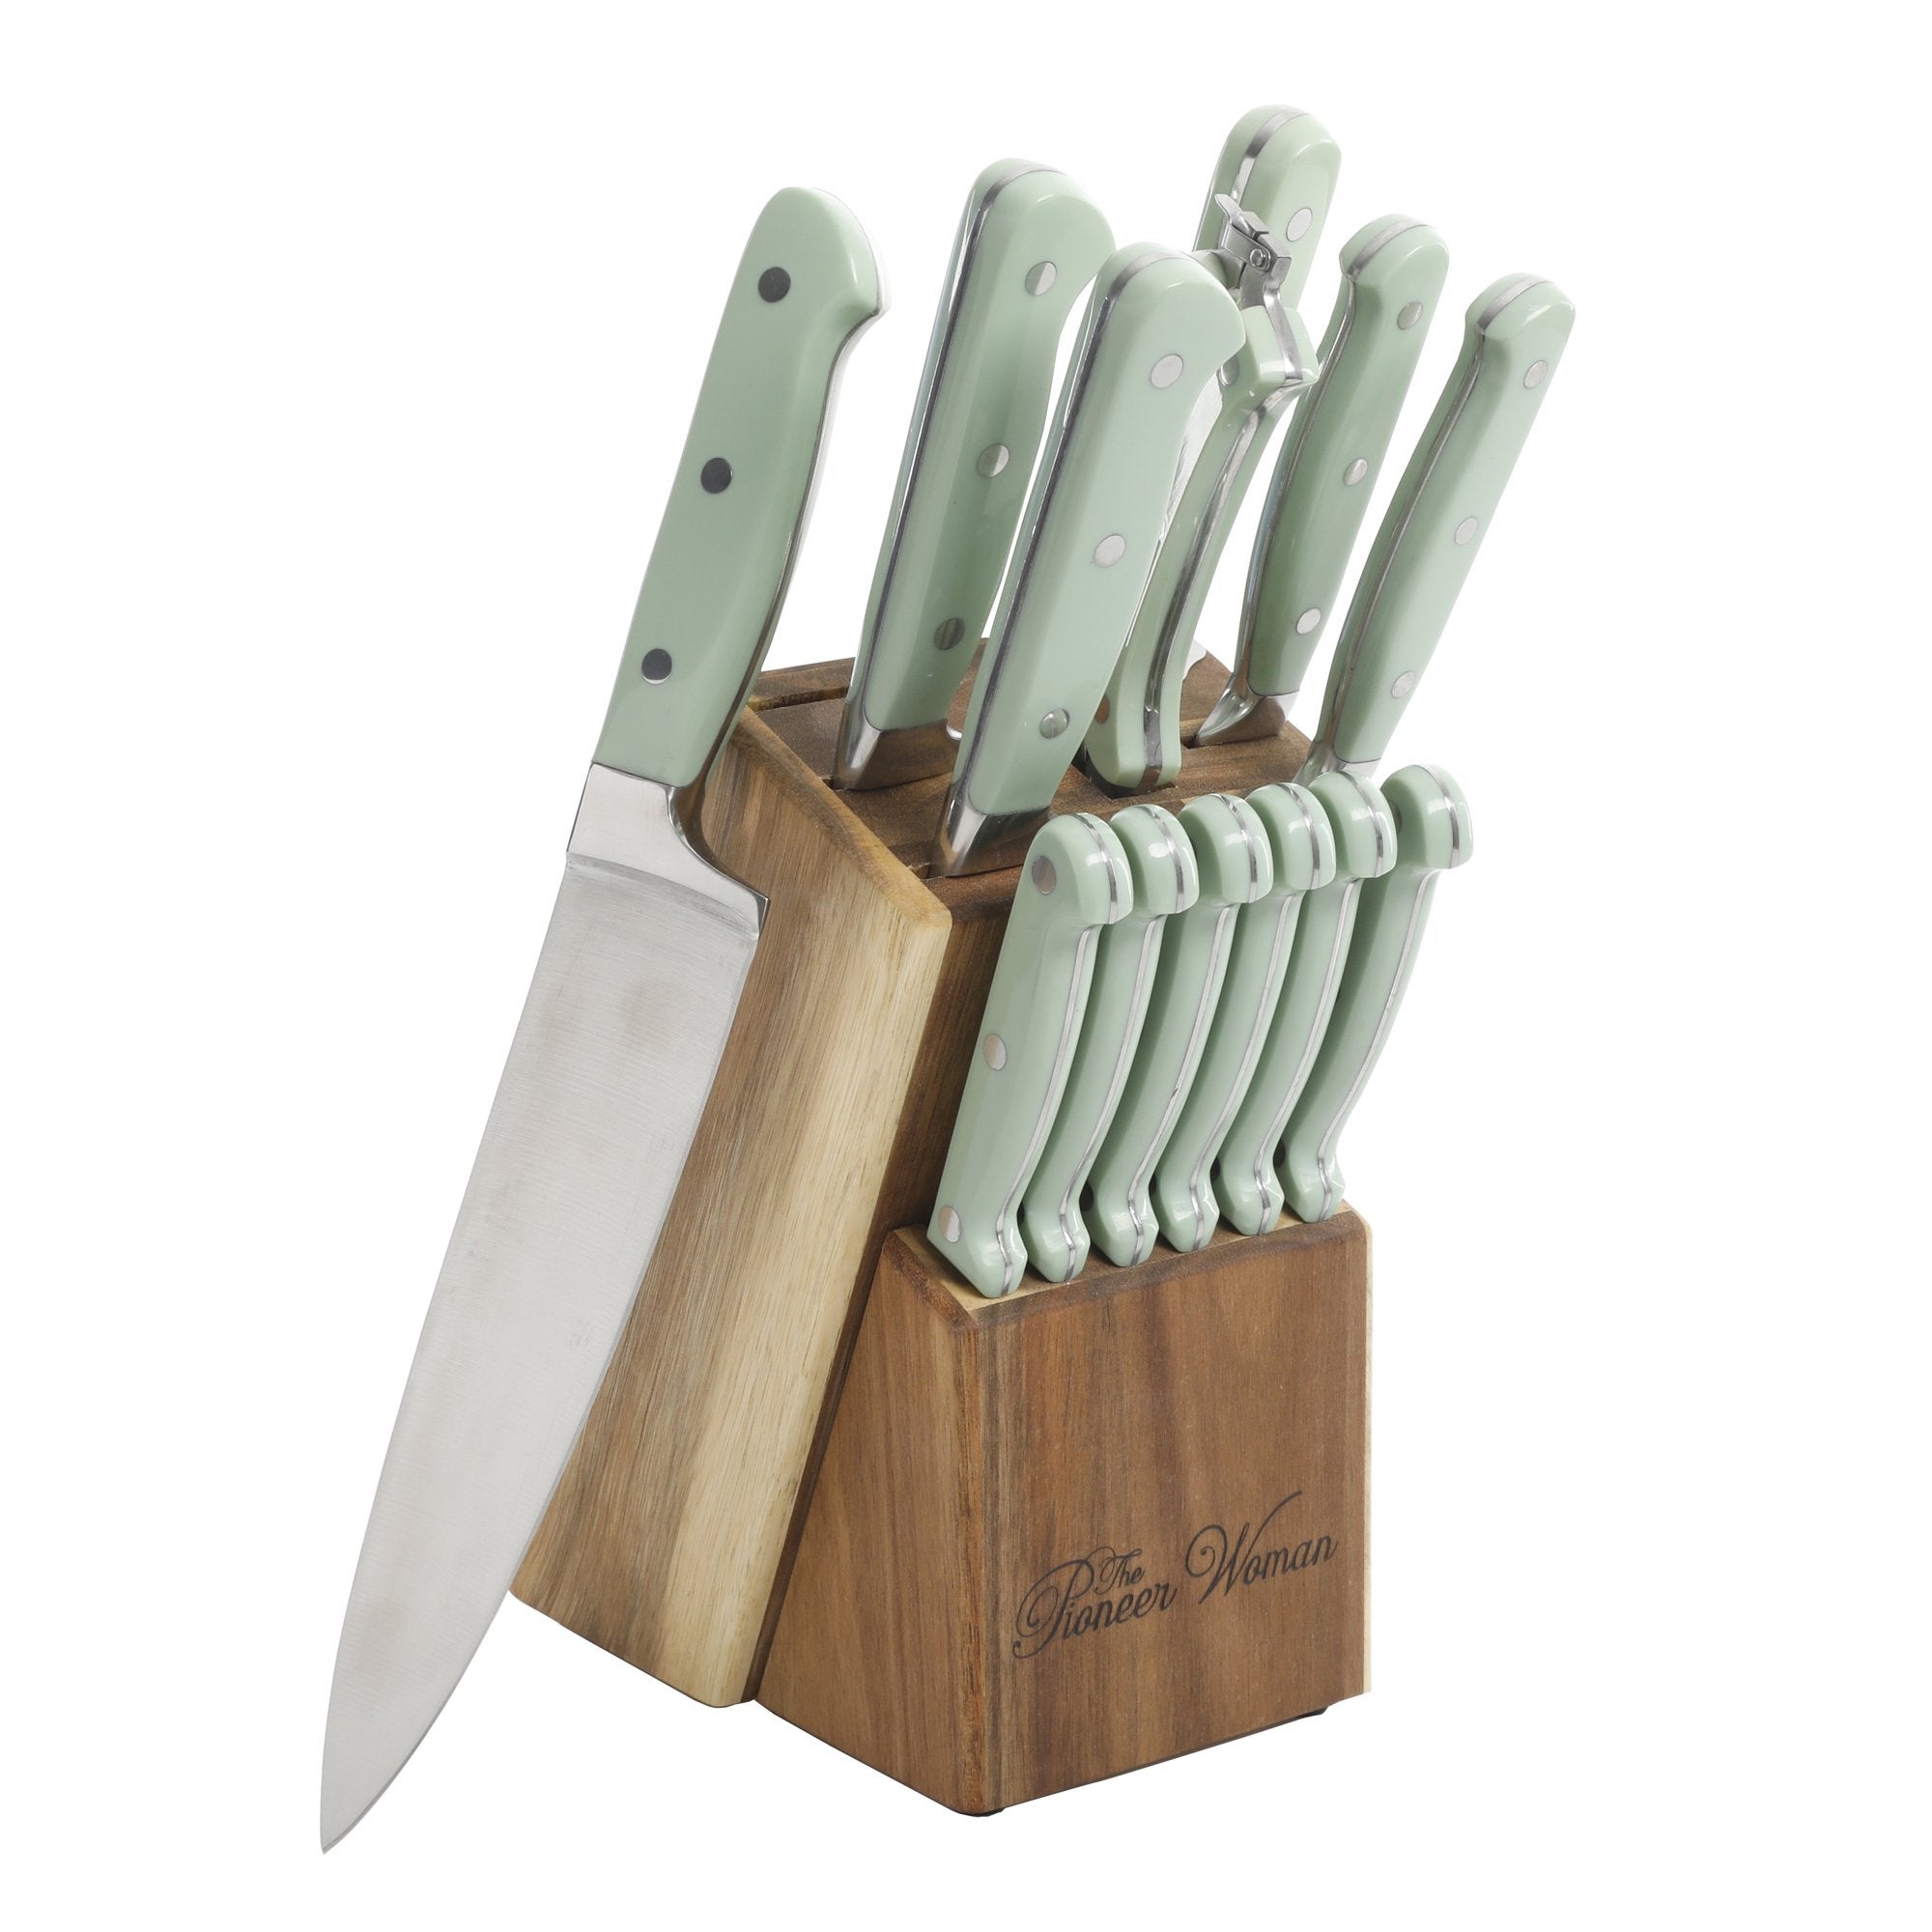 The Pioneer Woman + Frontier Collection 14-Piece Cutlery Set with Wood Block